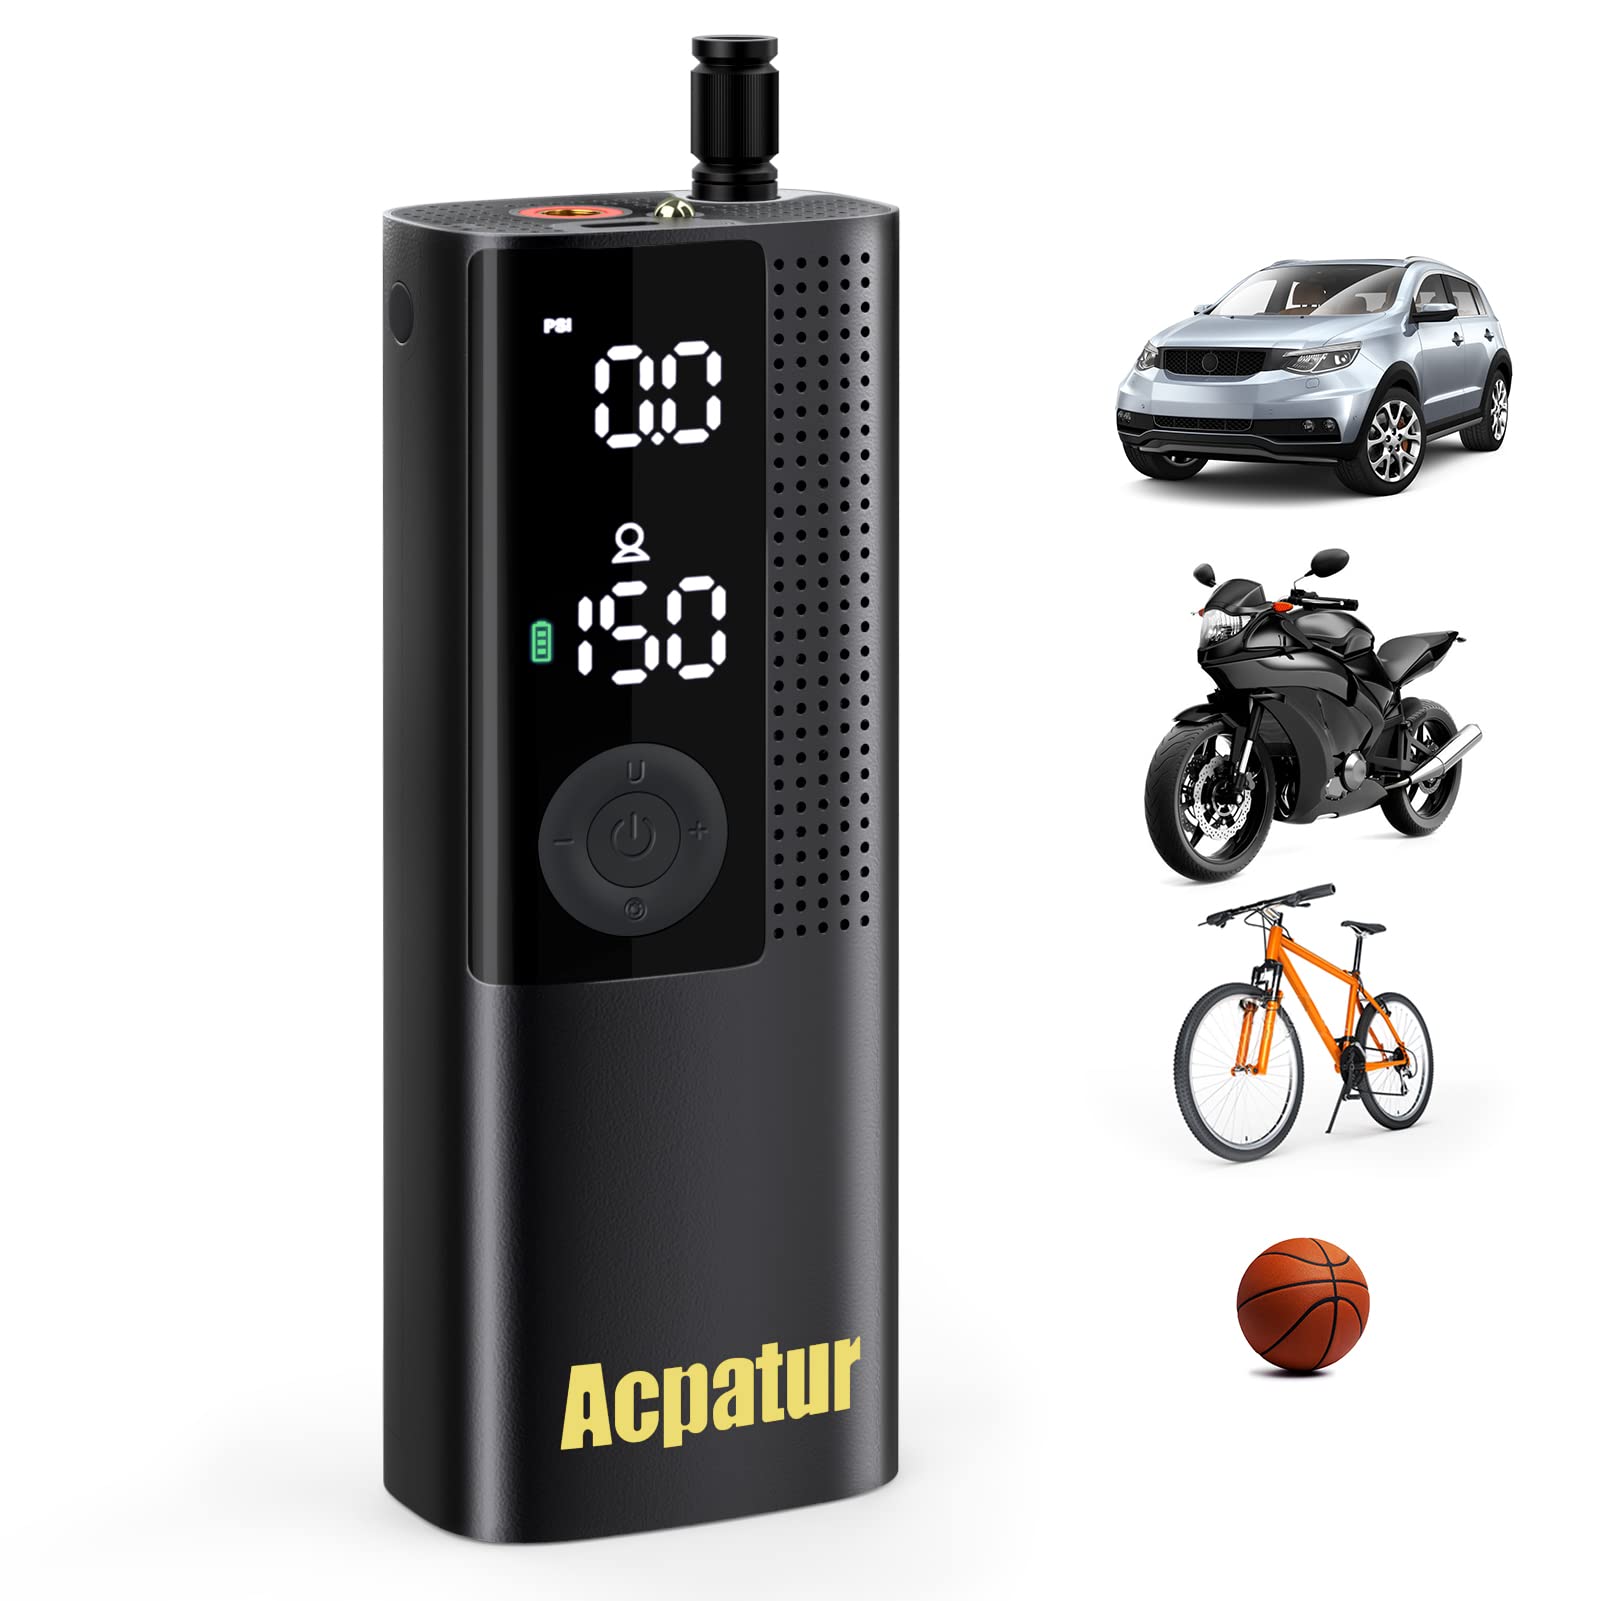 Acpatur Portable Air Compressor Tire Inflator, 150 PSI & Cordless Easy Operation, Accurate LCD Screen-Air Pump For Cars,Bikes, Motorcycles, Balls, Not Suitable For Trucks